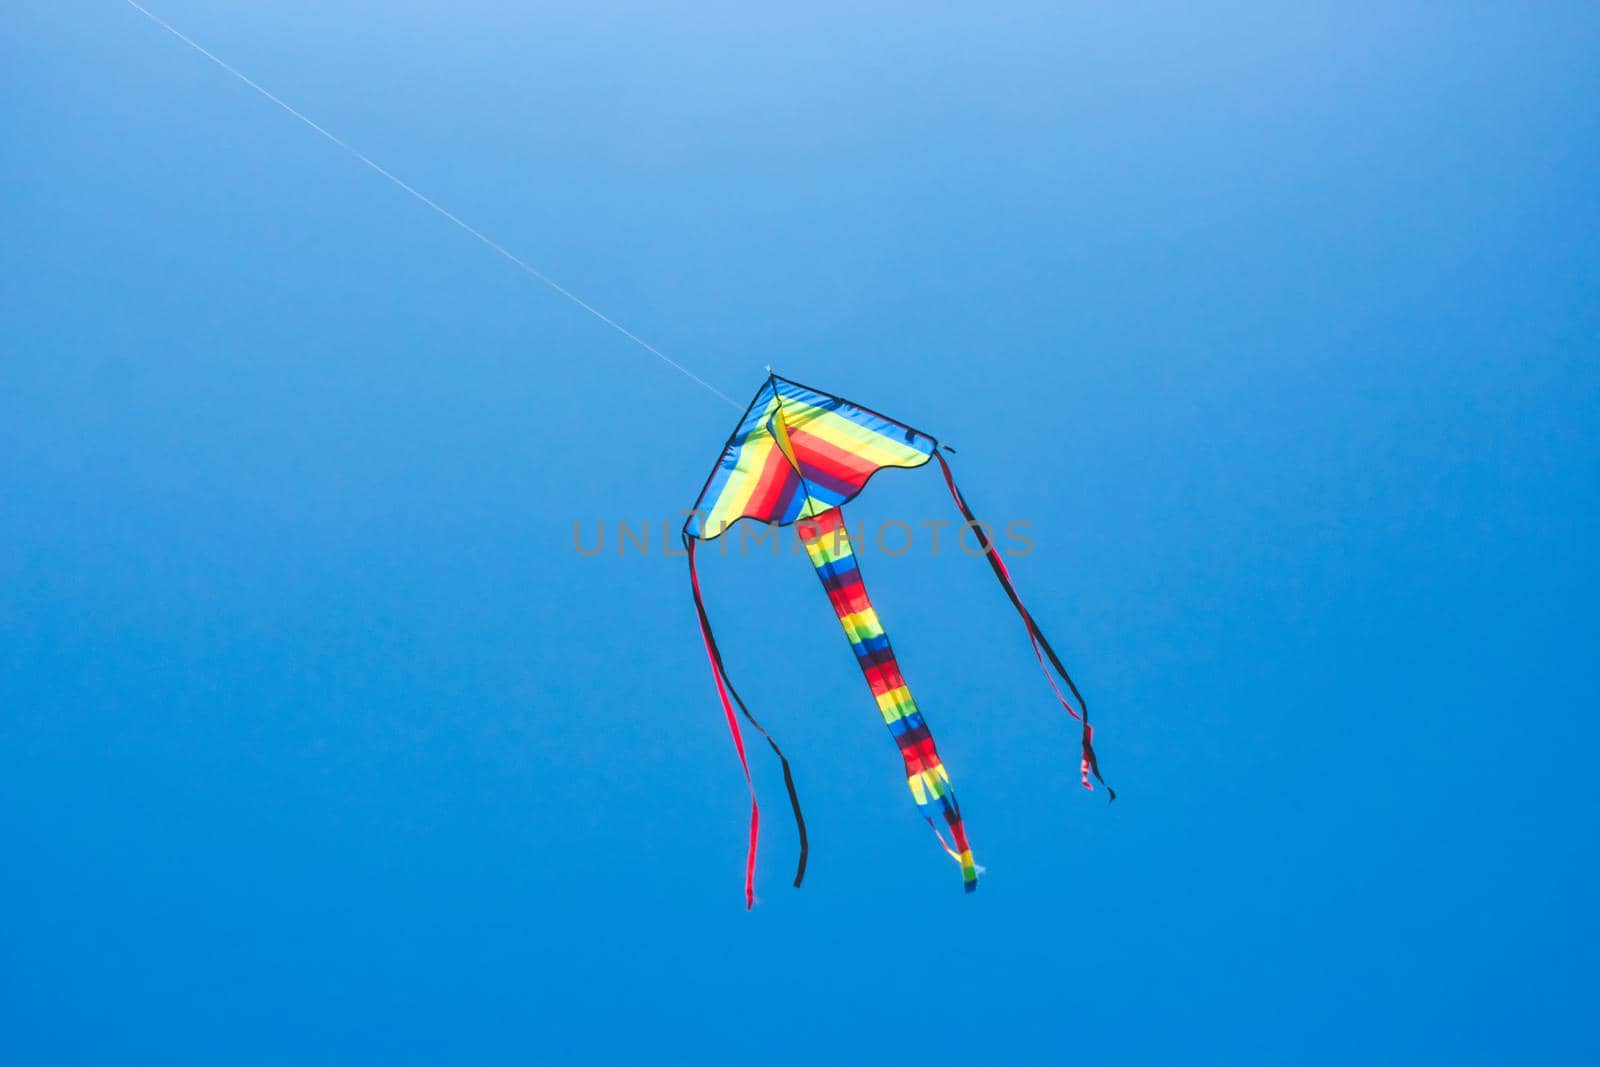 A colourful kite flying in a clear blue sky with a long tail and streamers